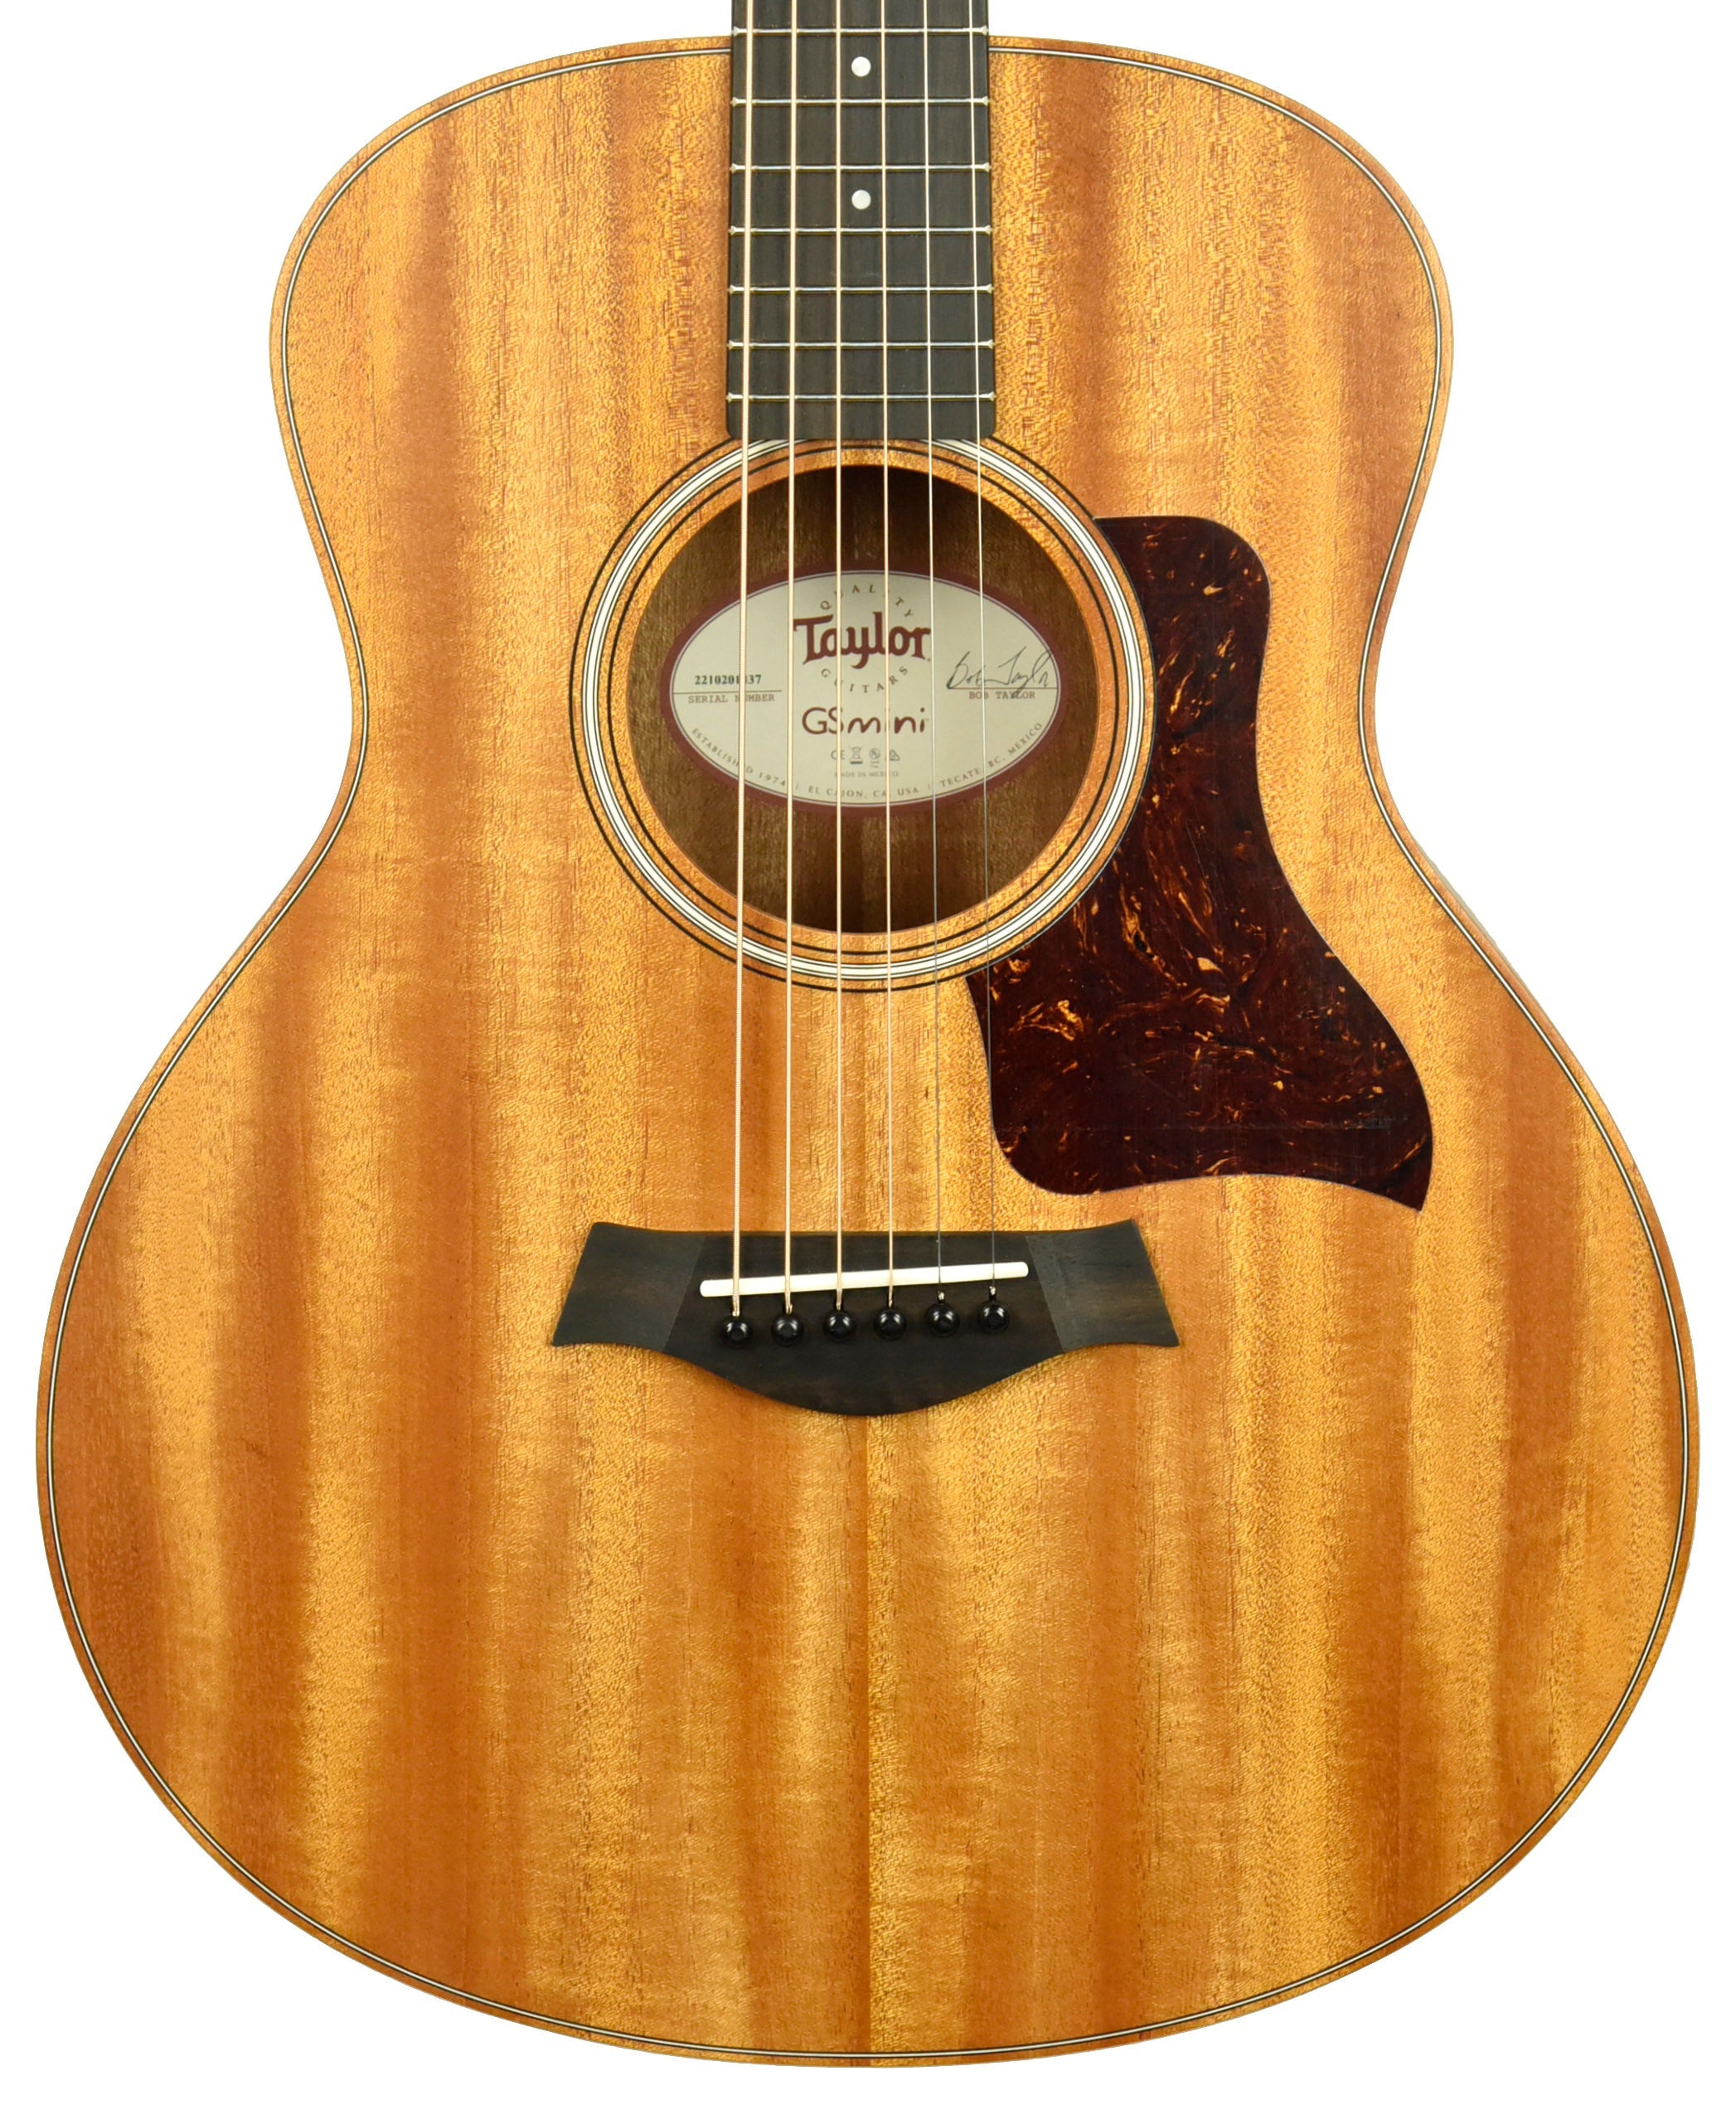 Taylor GS Mini Mahogany Acoustic Guitar 2209122248 | The Music Gallery